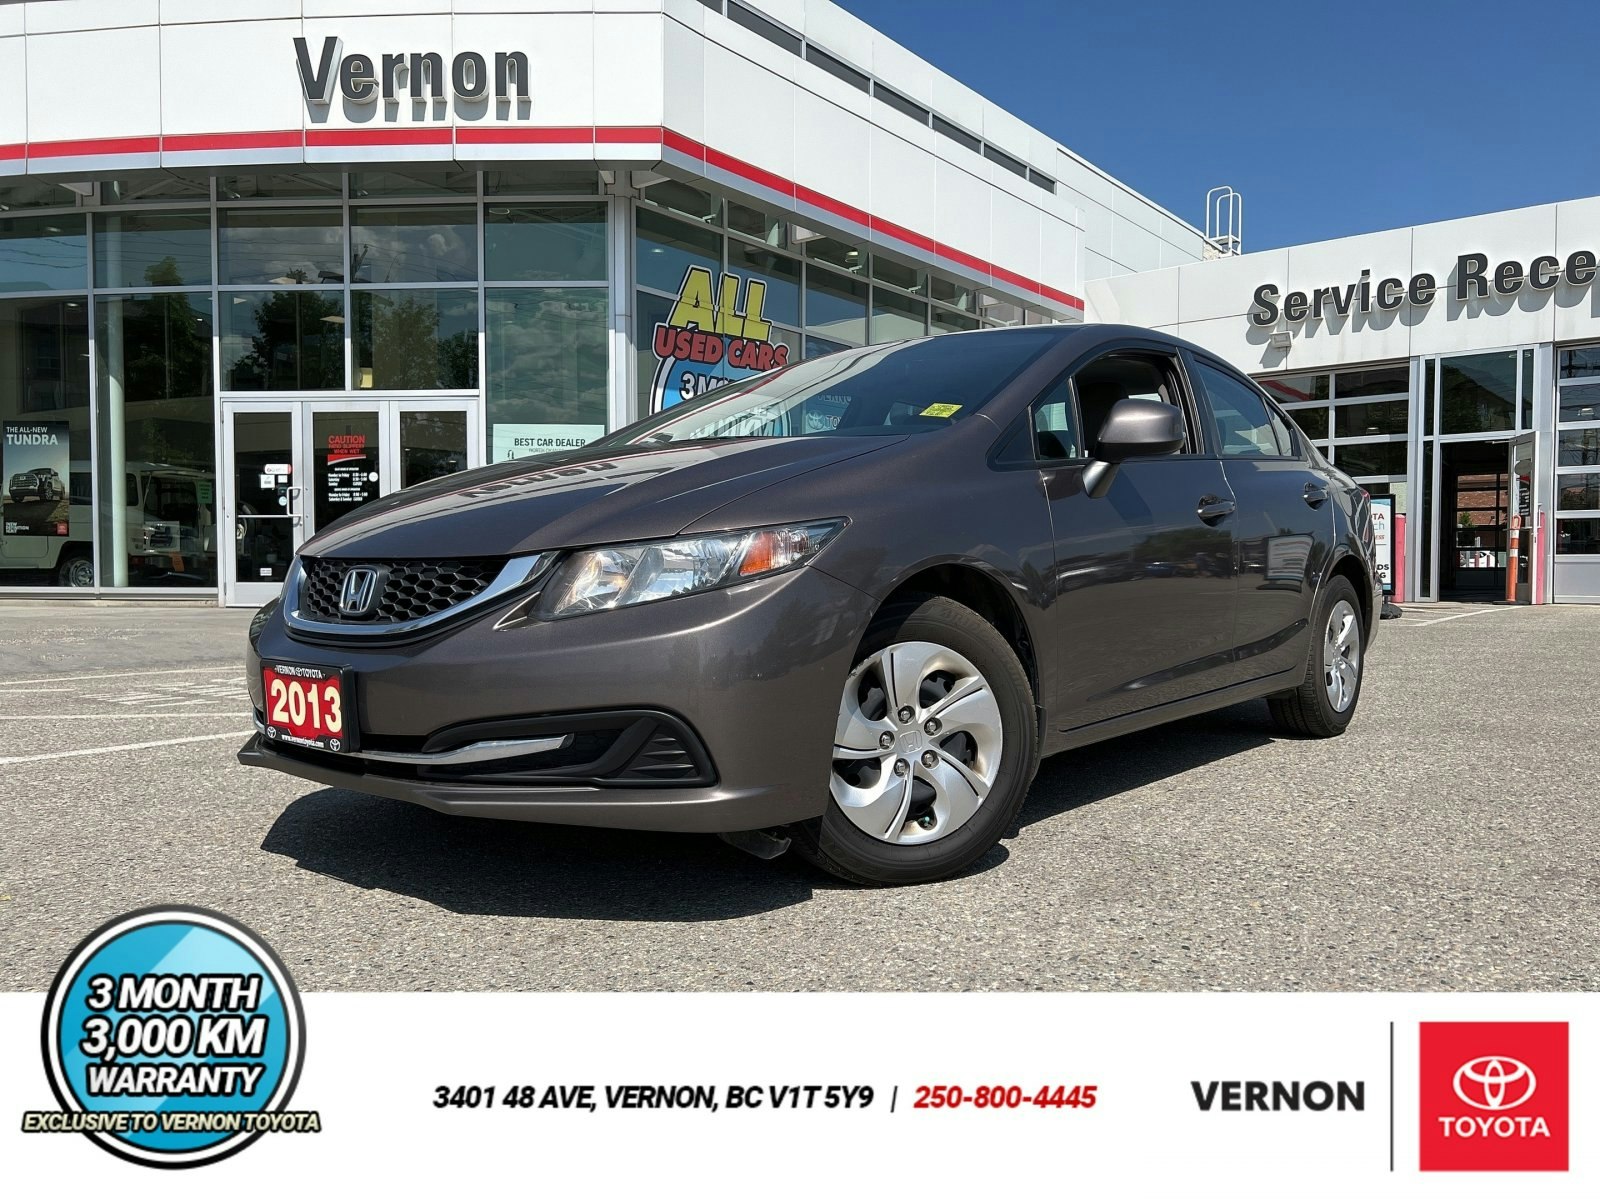 2013 Honda Civic Sdn LX | ONE OWNER | NO ACCIDENTS | HEATED SEATS (V4042A) Main Image